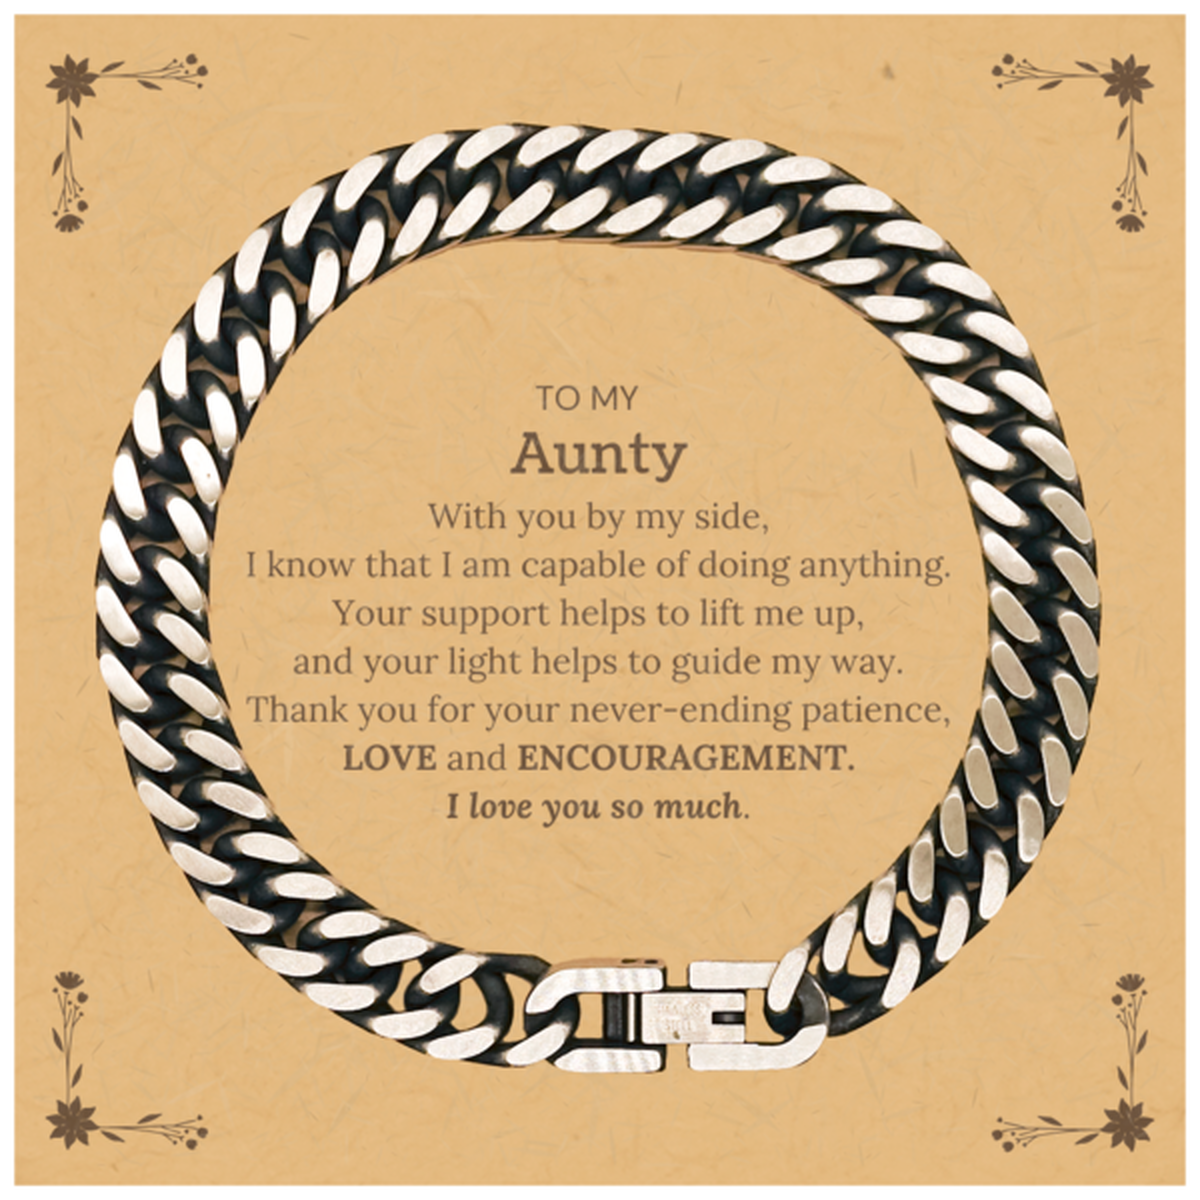 Appreciation Aunty Cuban Link Chain Bracelet Gifts, To My Aunty Birthday Christmas Wedding Keepsake Gifts for Aunty With you by my side, I know that I am capable of doing anything. I love you so much